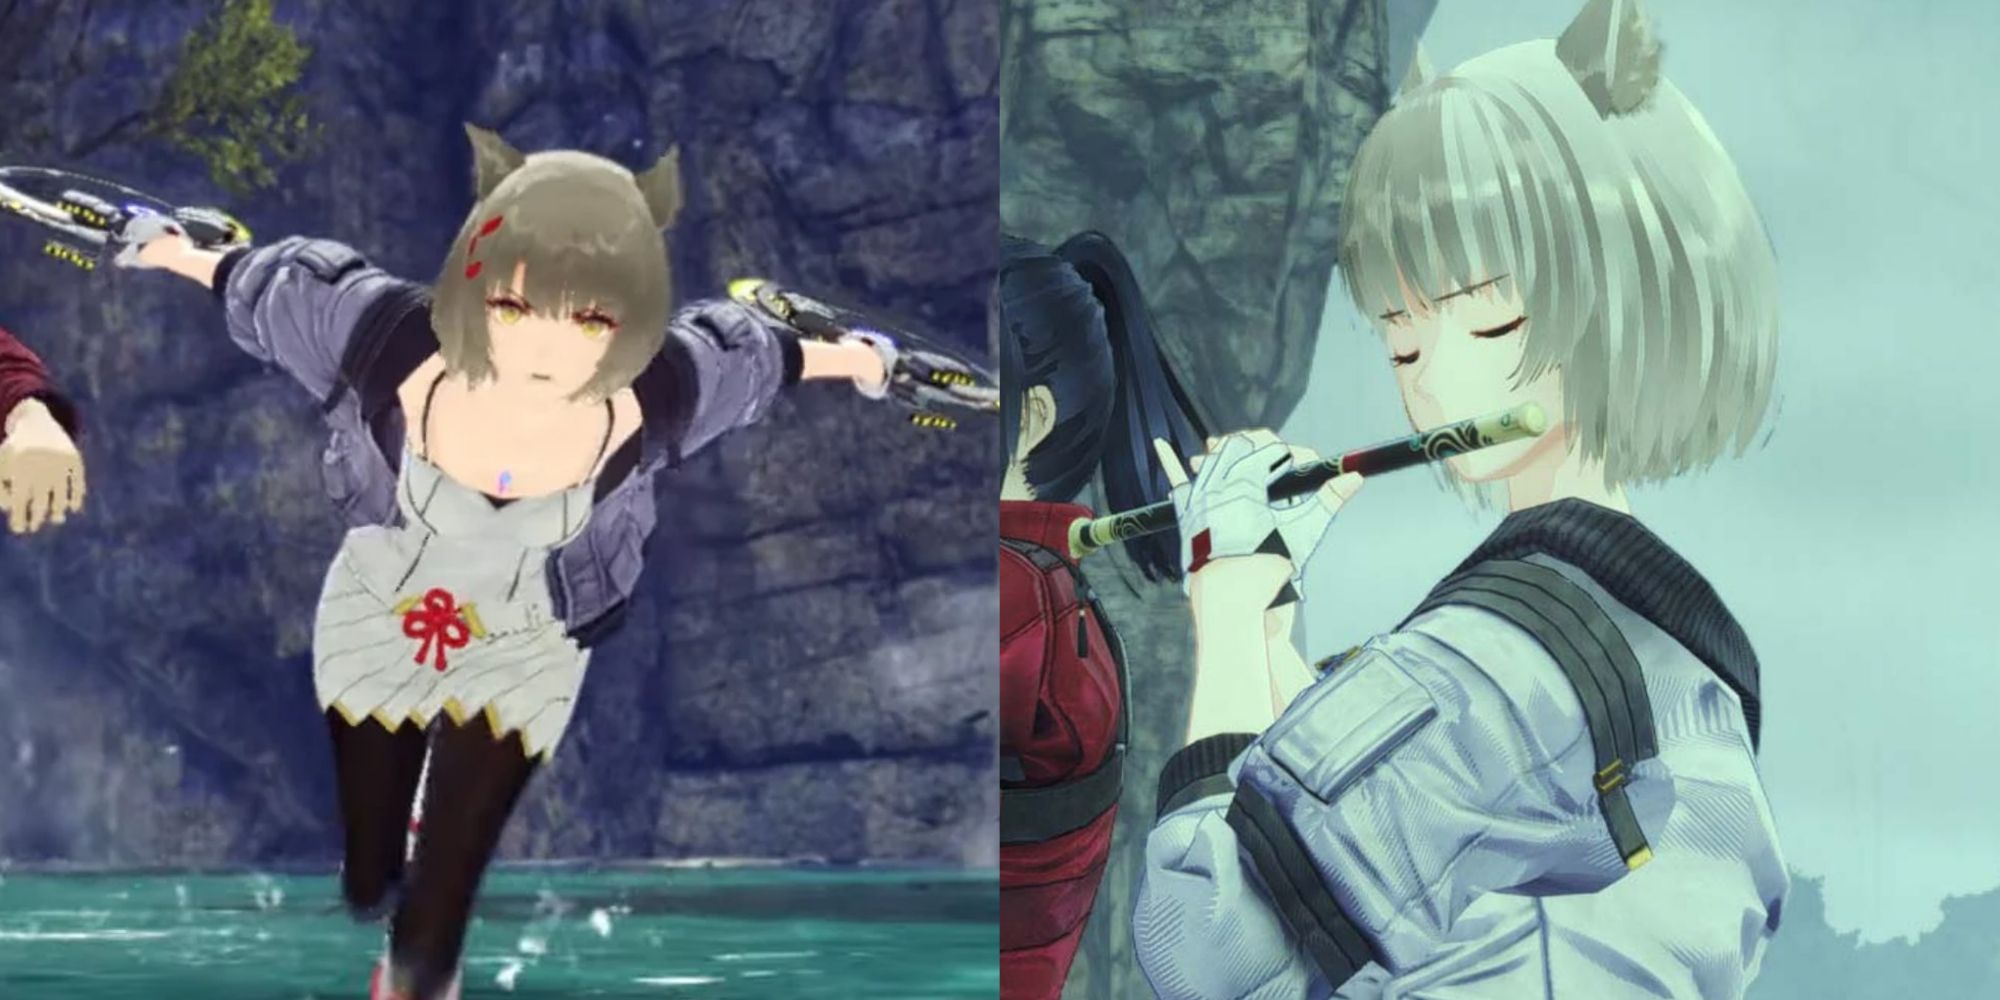 Split image screenshots of Mio running and playing the flute wearing the Zephyr outfit in Xenoblade Chronicles 3.